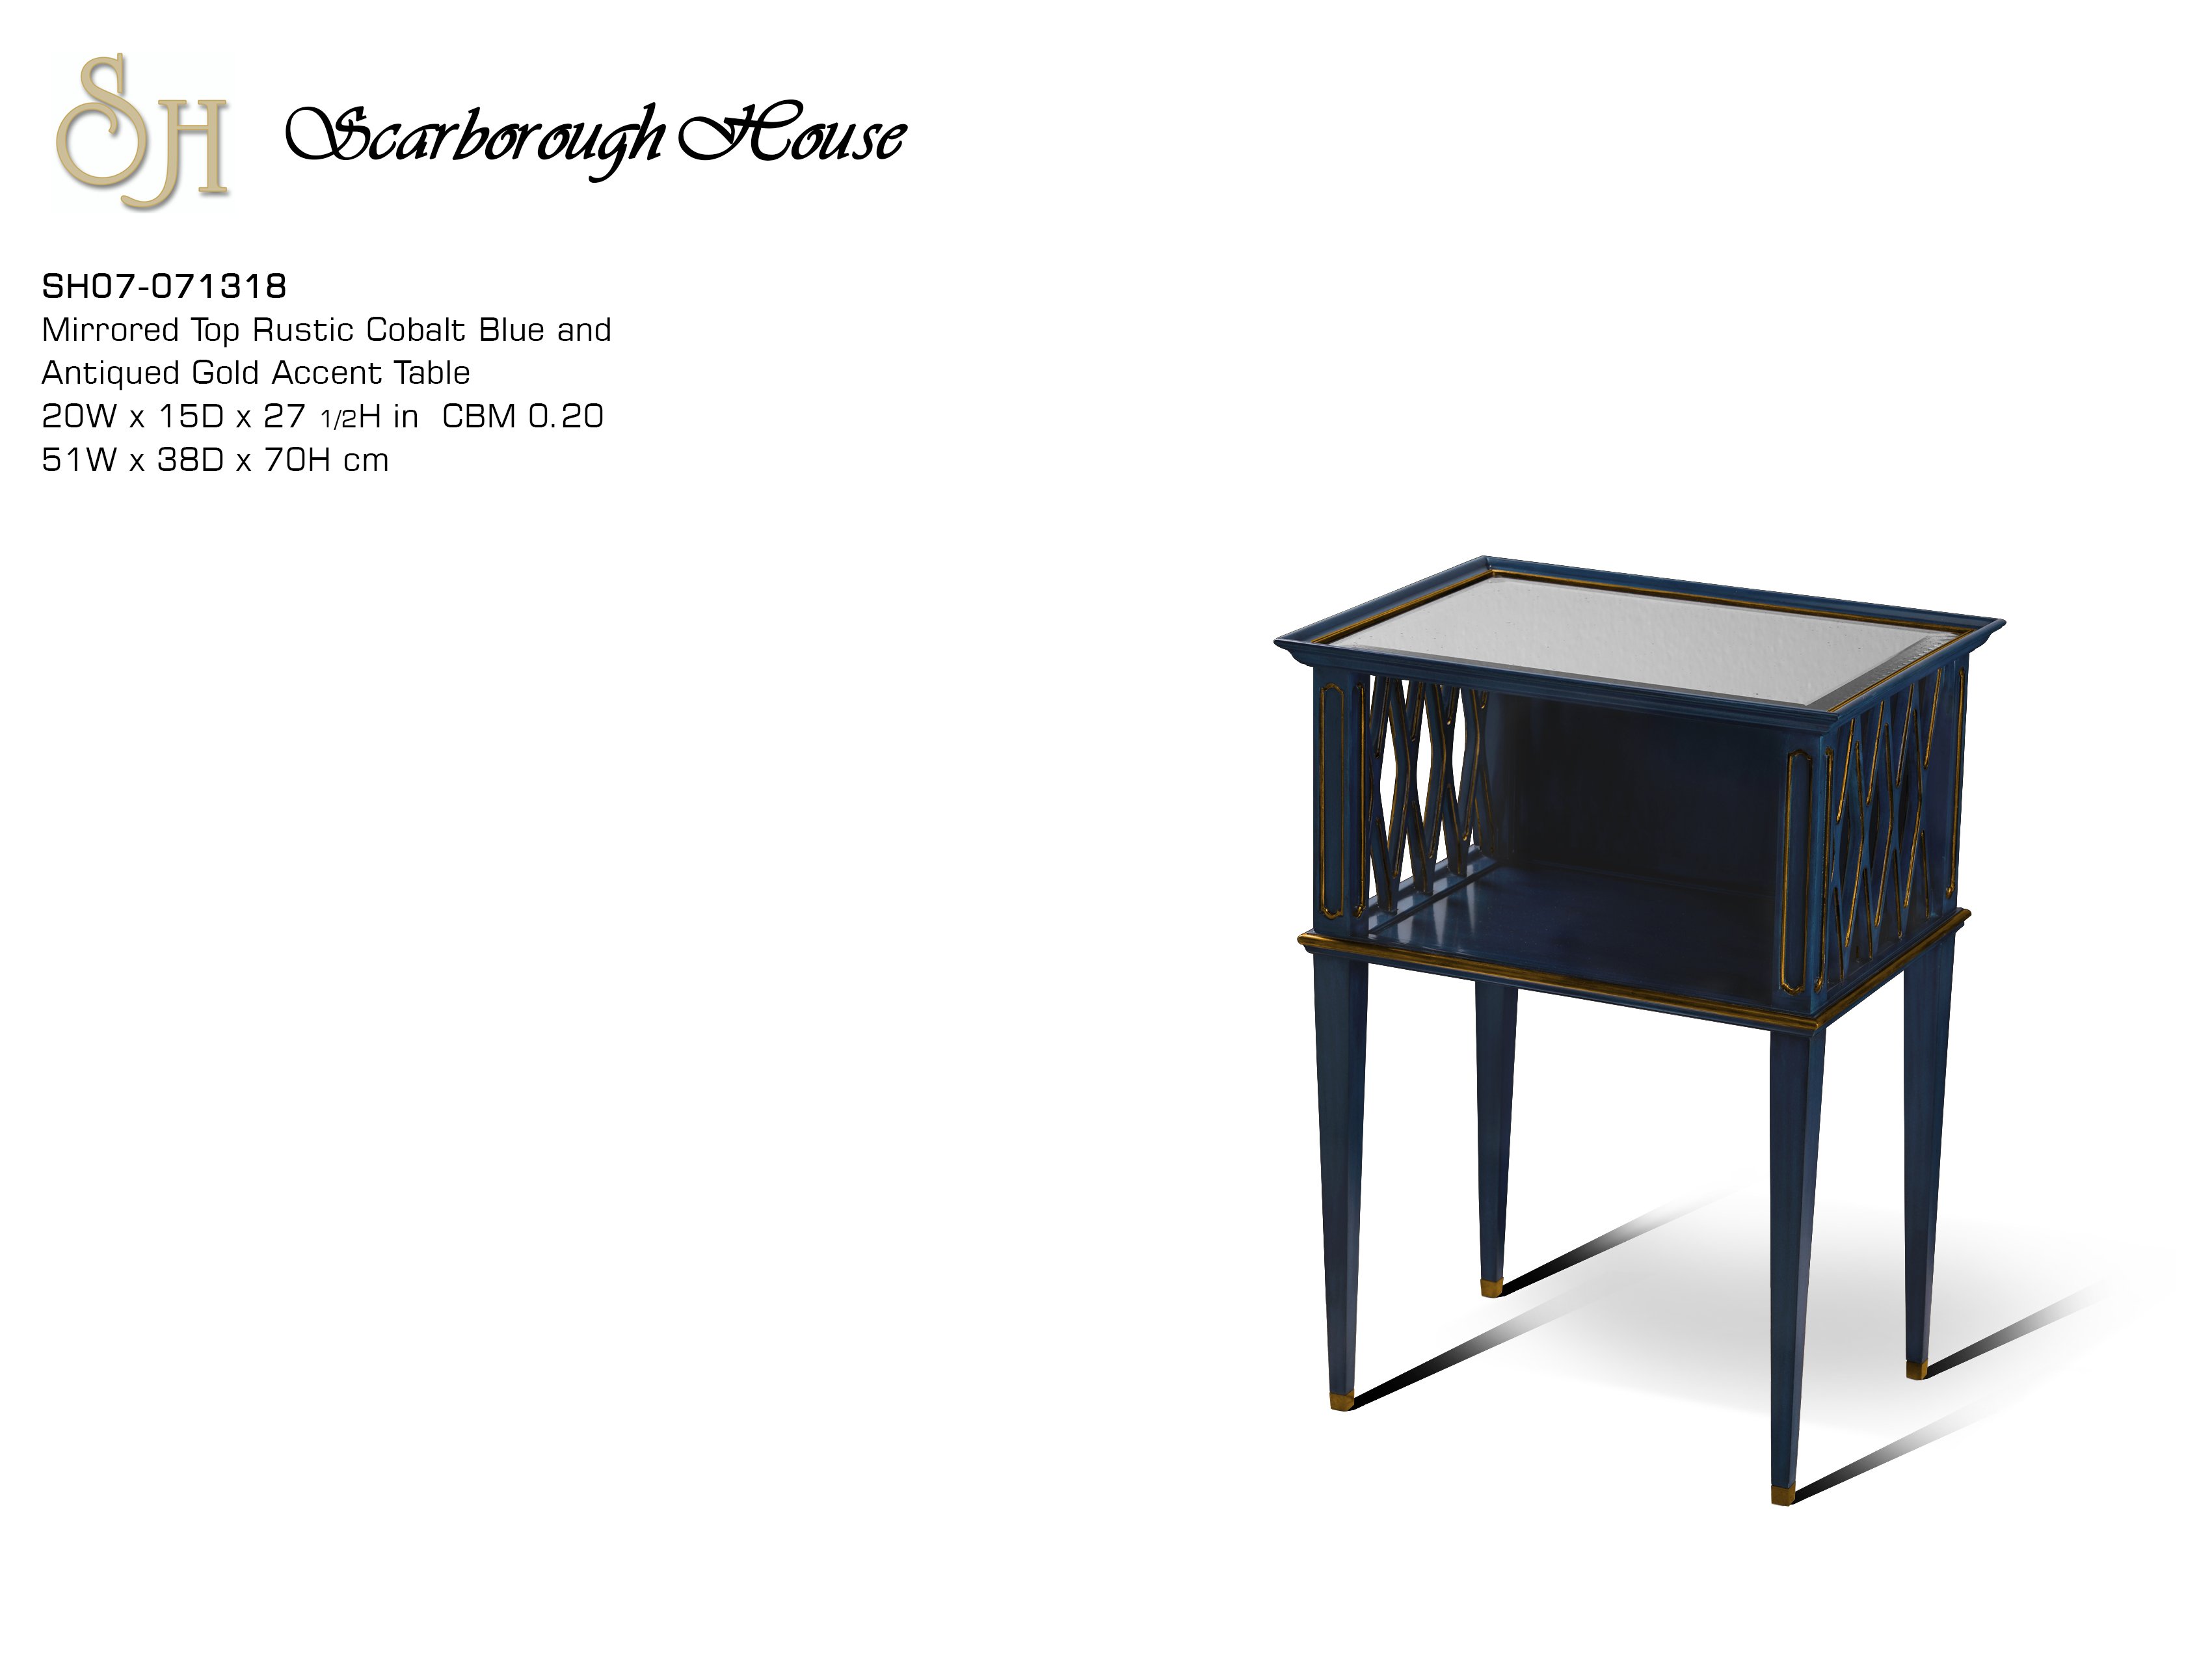 cobalt blue accent table scarborough house click here for printable dining clothes tray modern console retro bedroom chair patio end tables gold drawer pulls drum living room